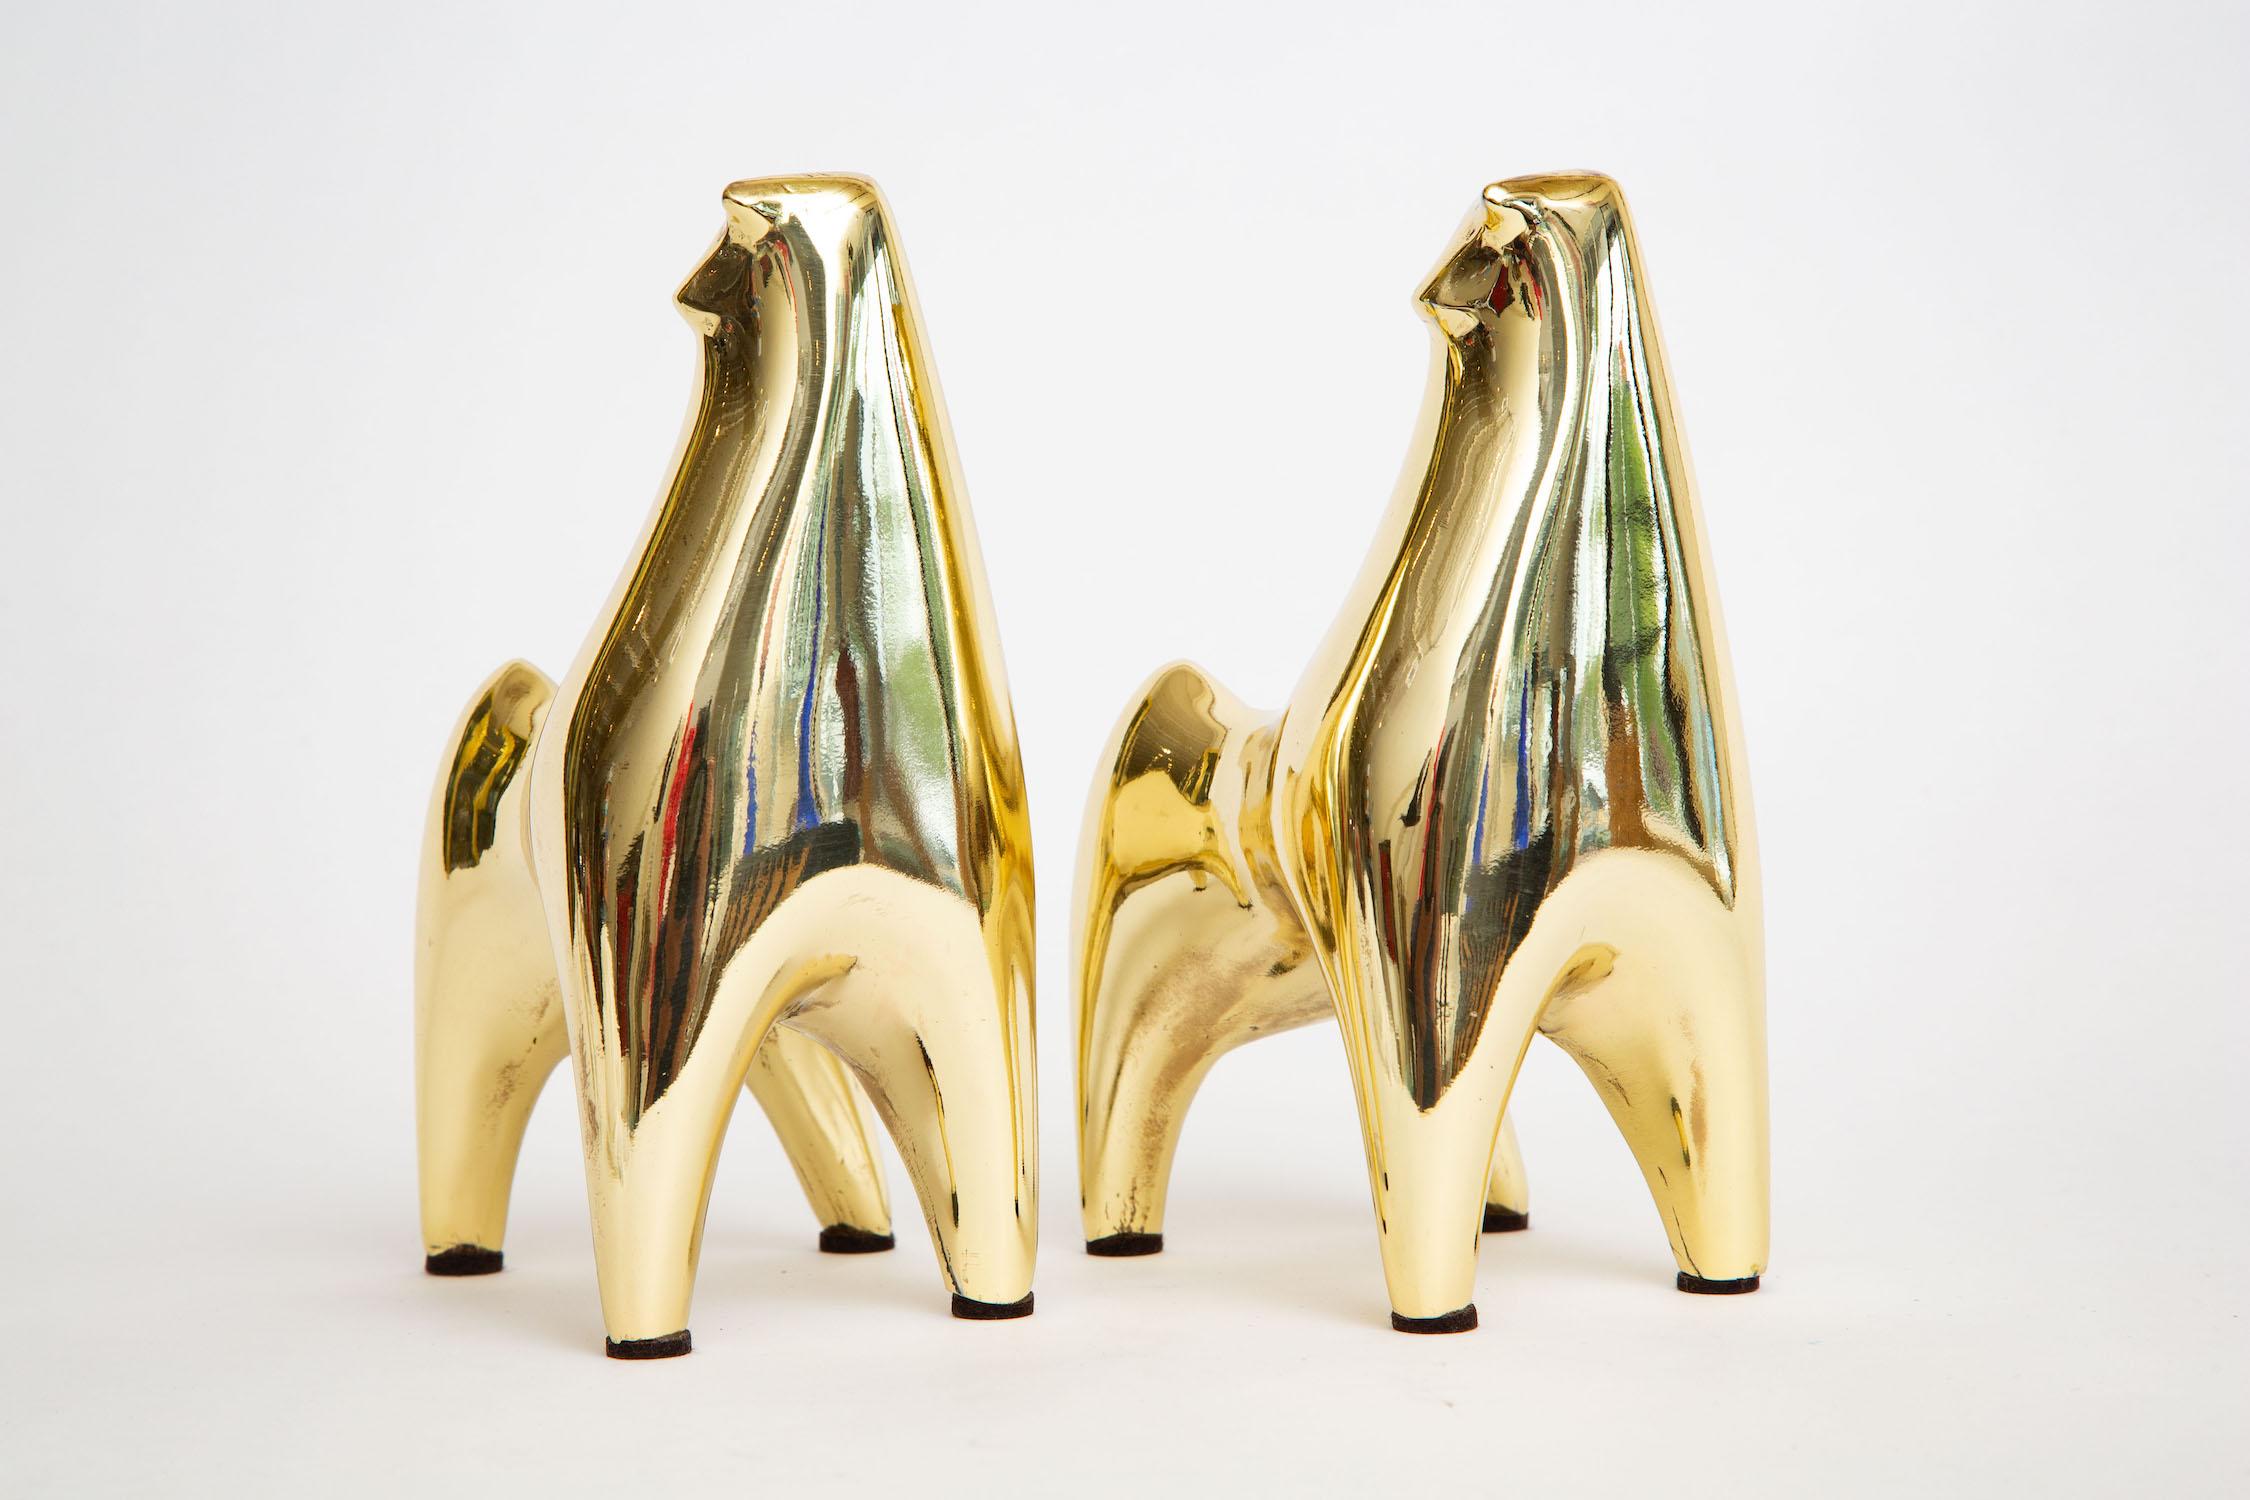  Norman Bleckner Brass Bull Bookends Pair Of Vintage In Good Condition For Sale In North Miami, FL